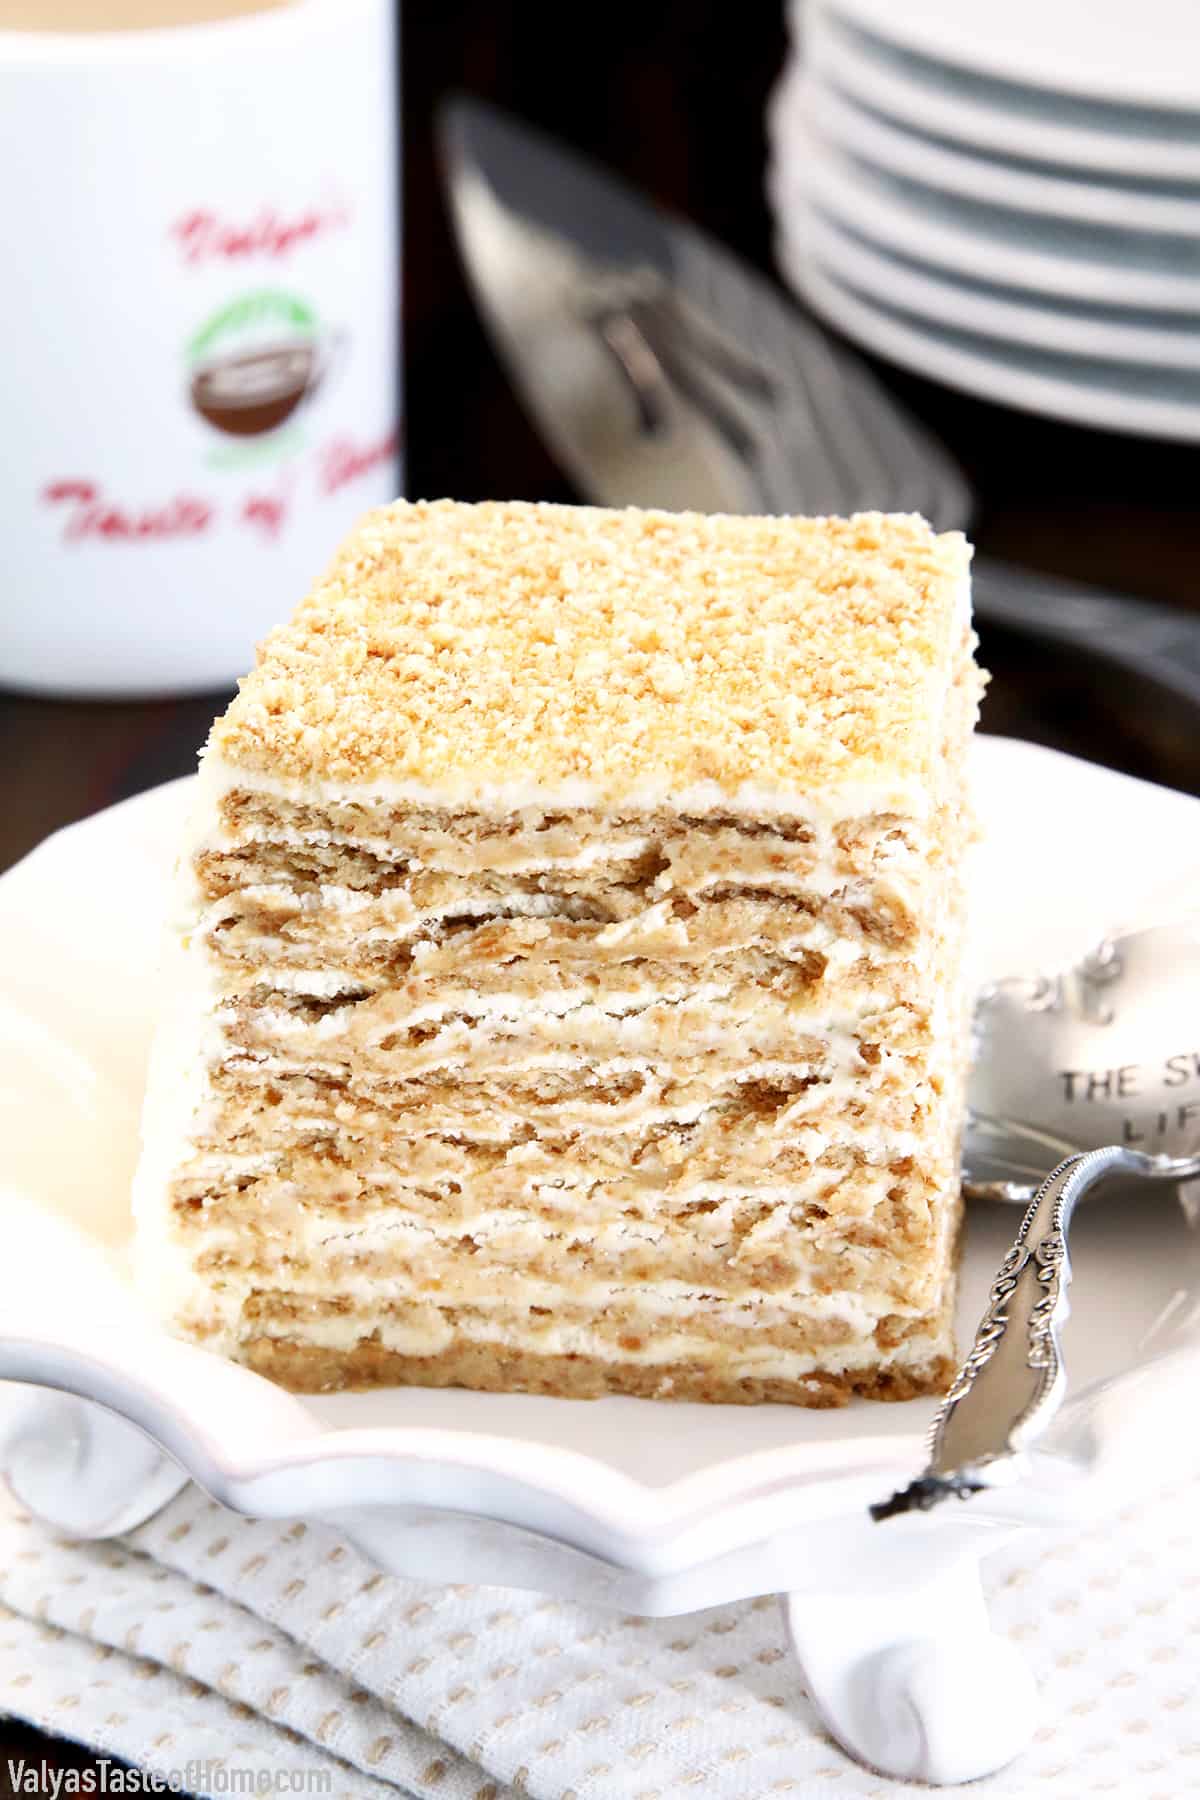 You’ll get a beautiful cake that has a tangy creamy filling that pair perfectly with the Graham Crackers.